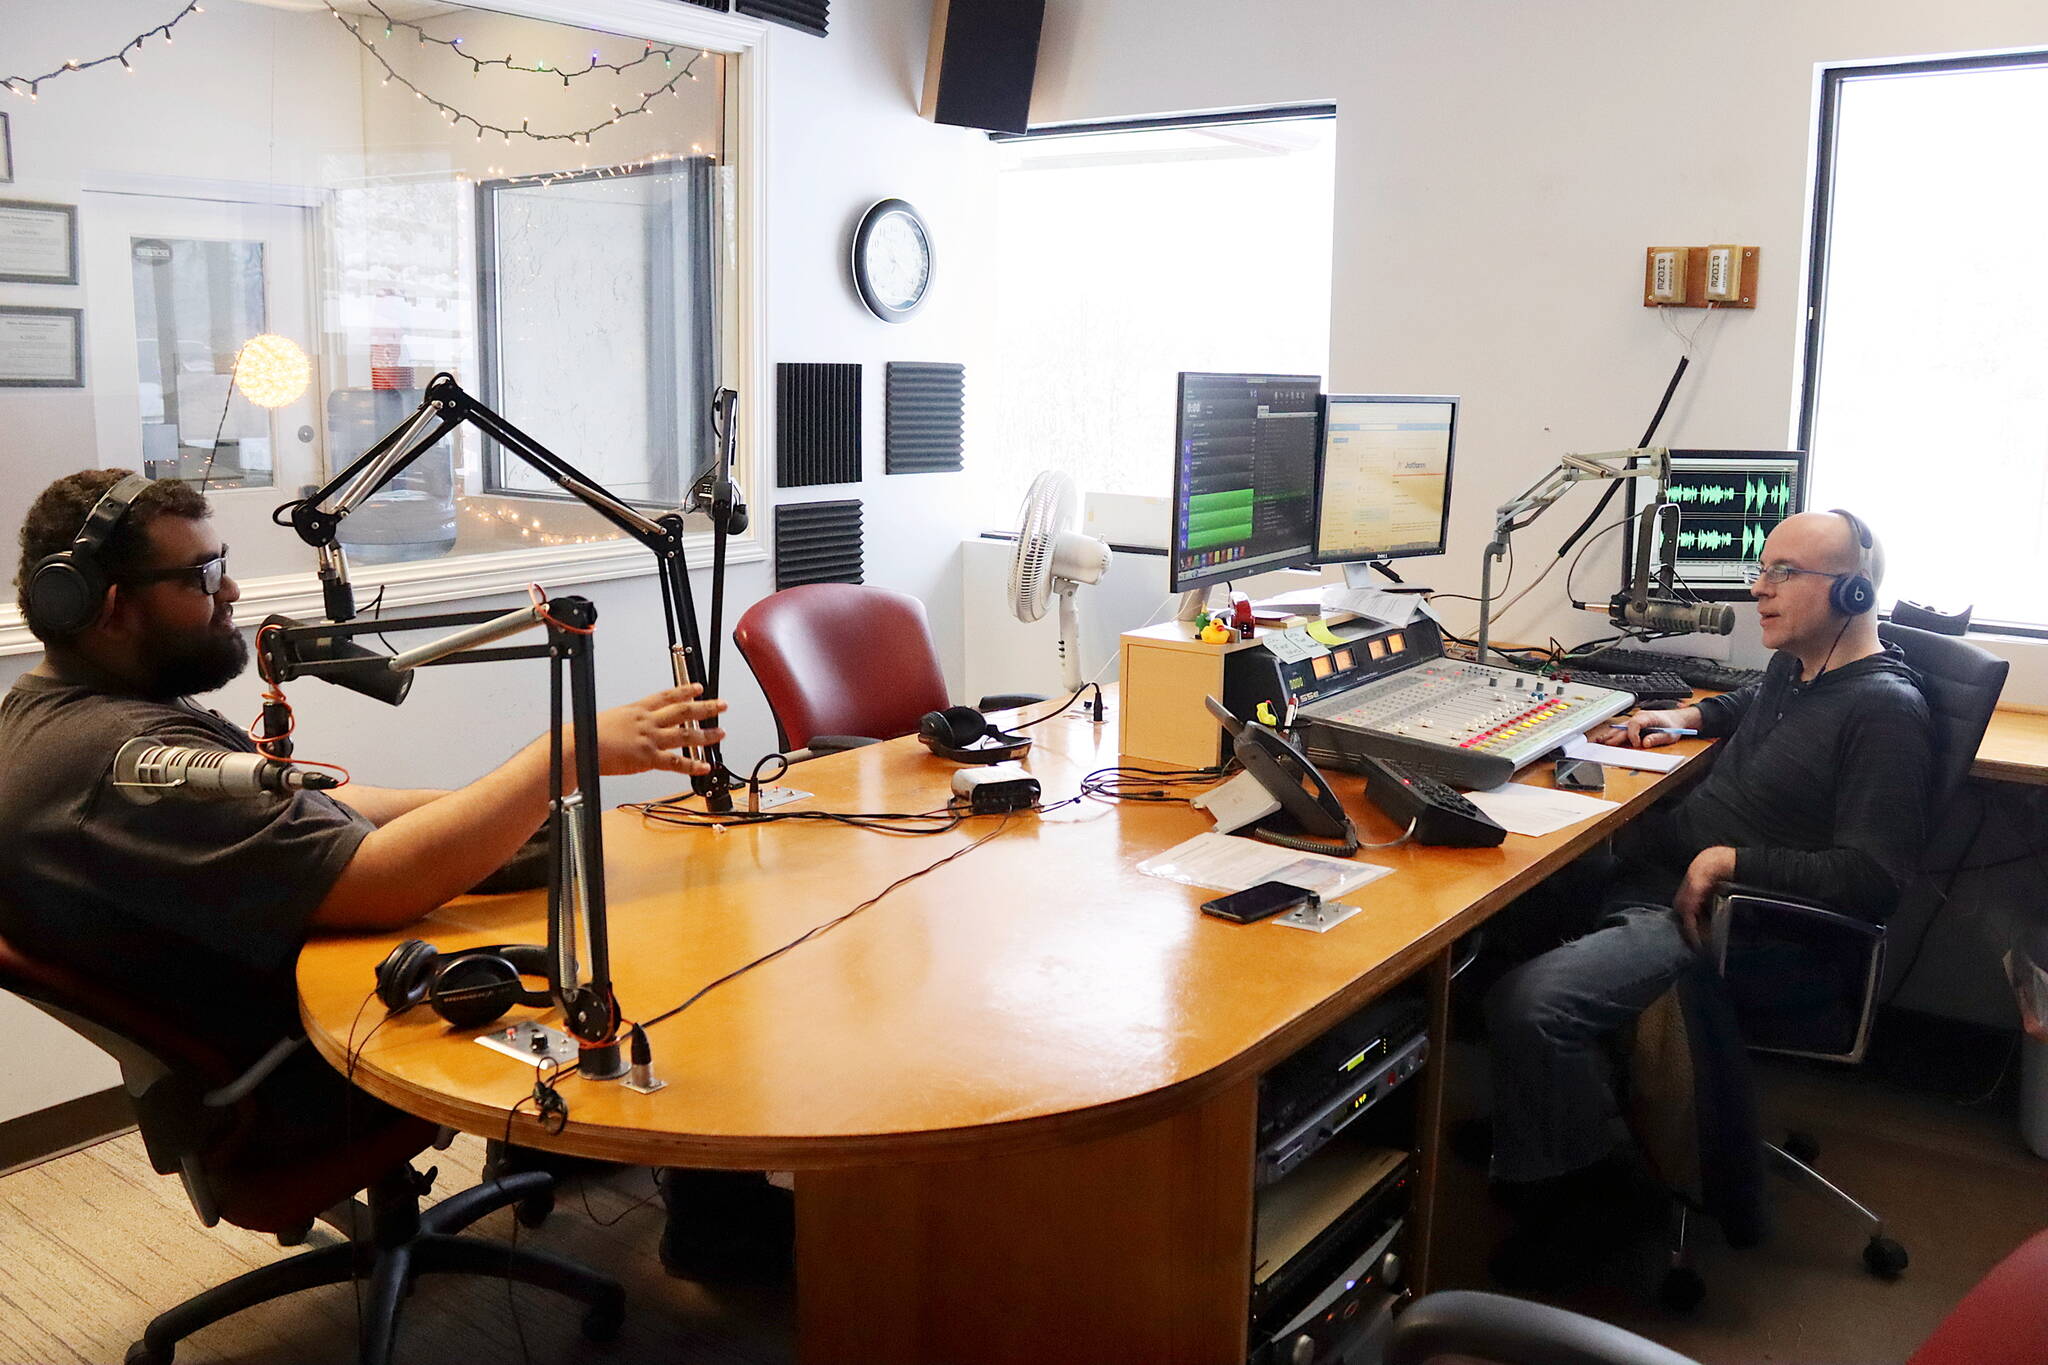 Jordan Lewis (left), news director for Local First Media Group, discusses the day’s top news stories with Wade Bryson during the final live broadcast of KINY-AM’s “Problem Corner” on Friday. (Mark Sabbatini / Juneau Empire)